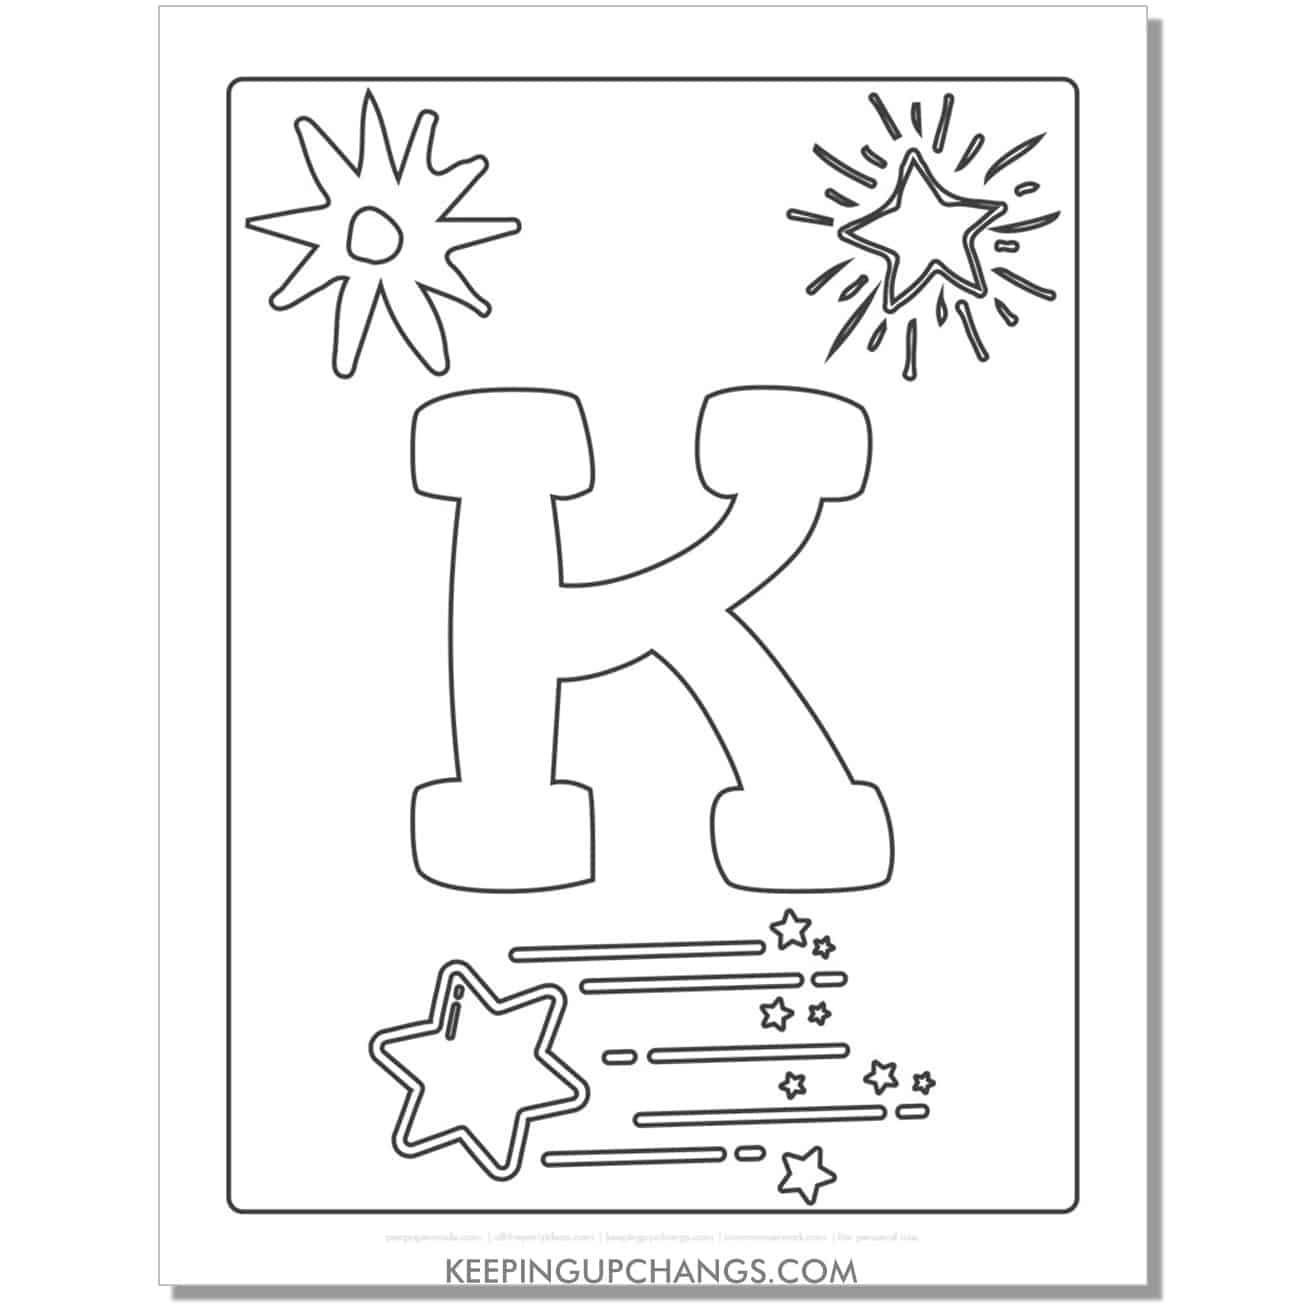 cool letter k to color with stars, space theme.